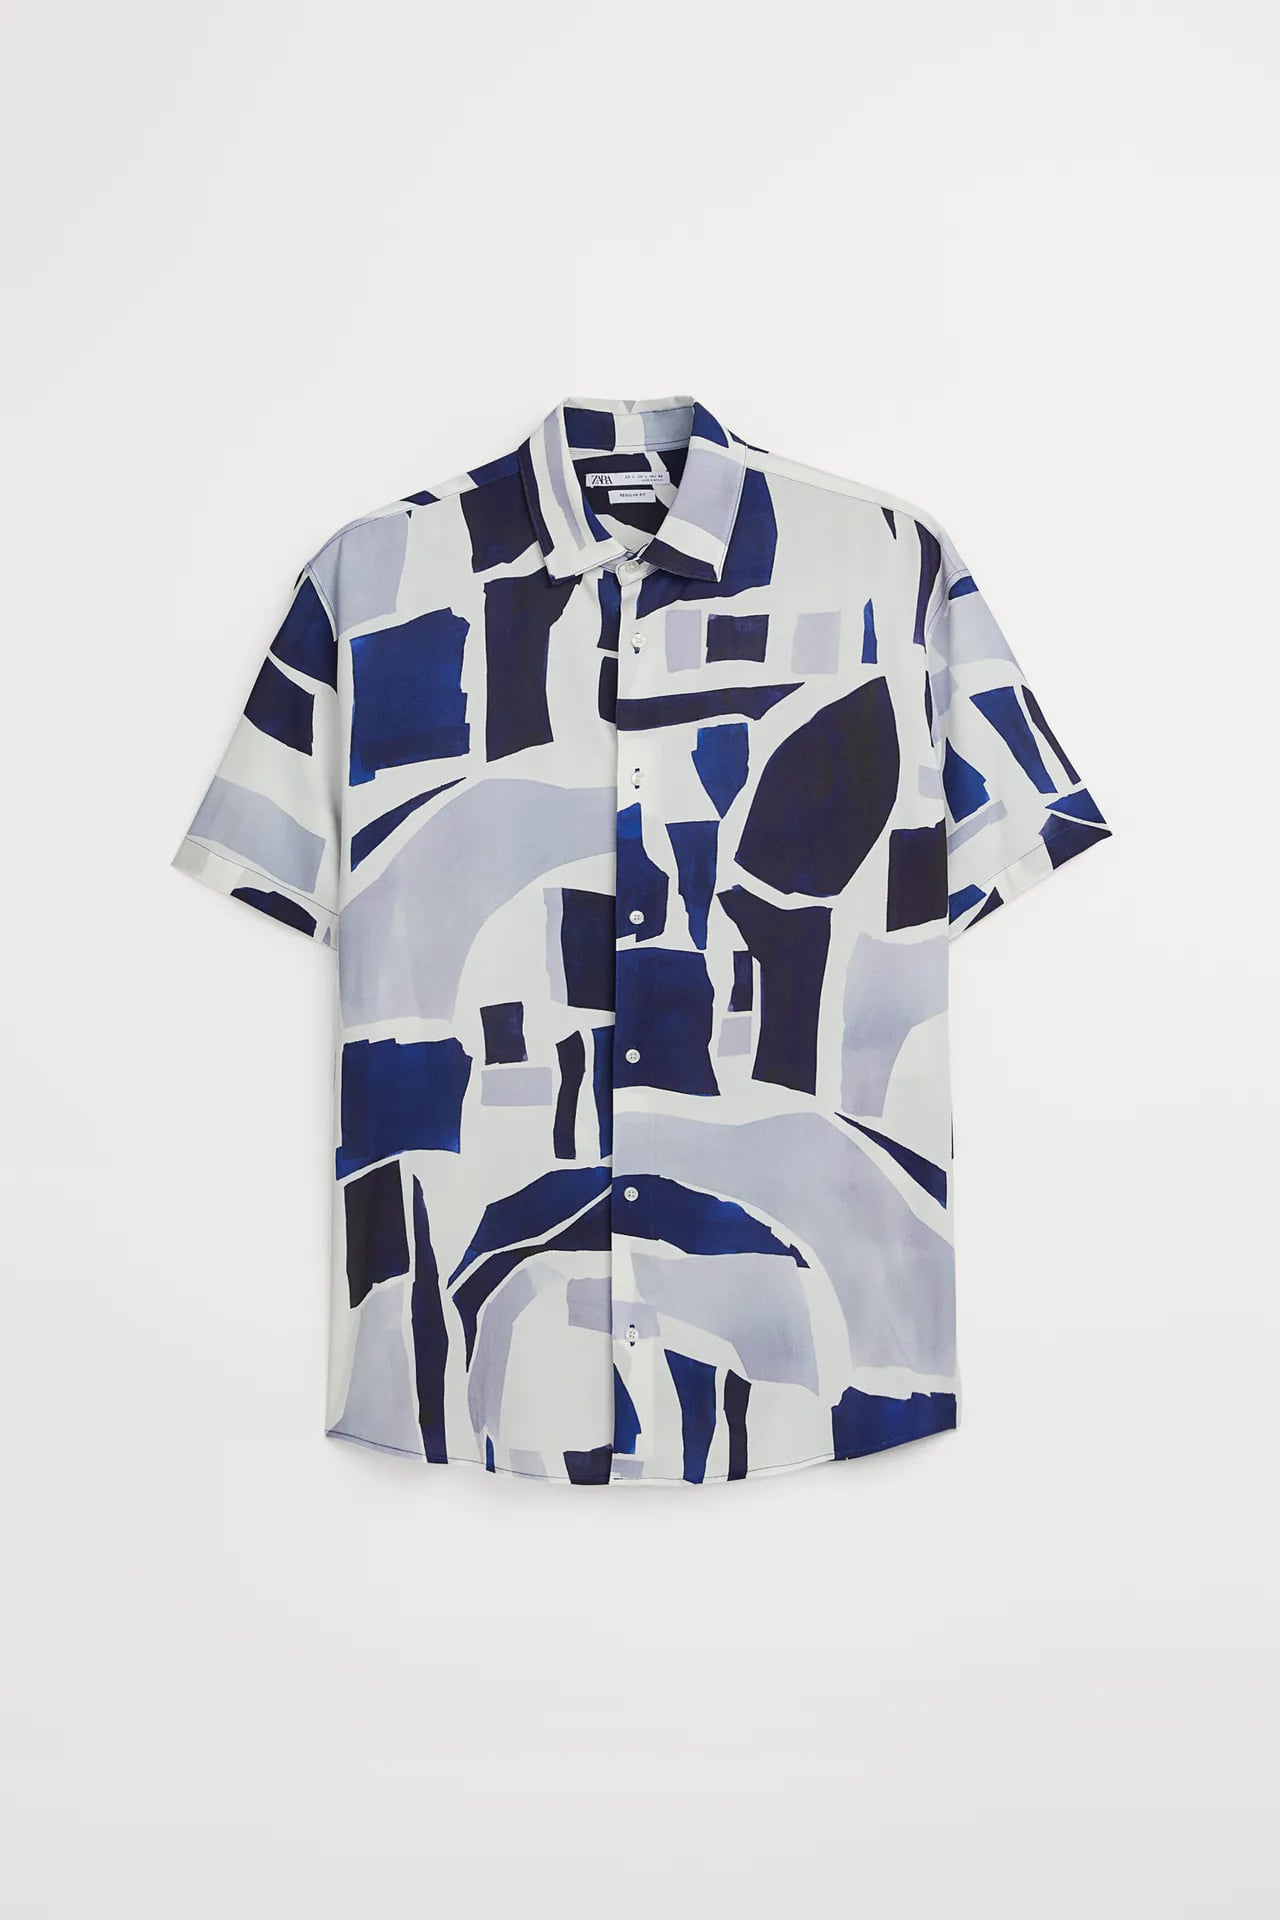 Zara Geometric Print Shirt, Nick Jonas Is the King of Abstract  Button-Downs in This Luxurious Silk Jacket